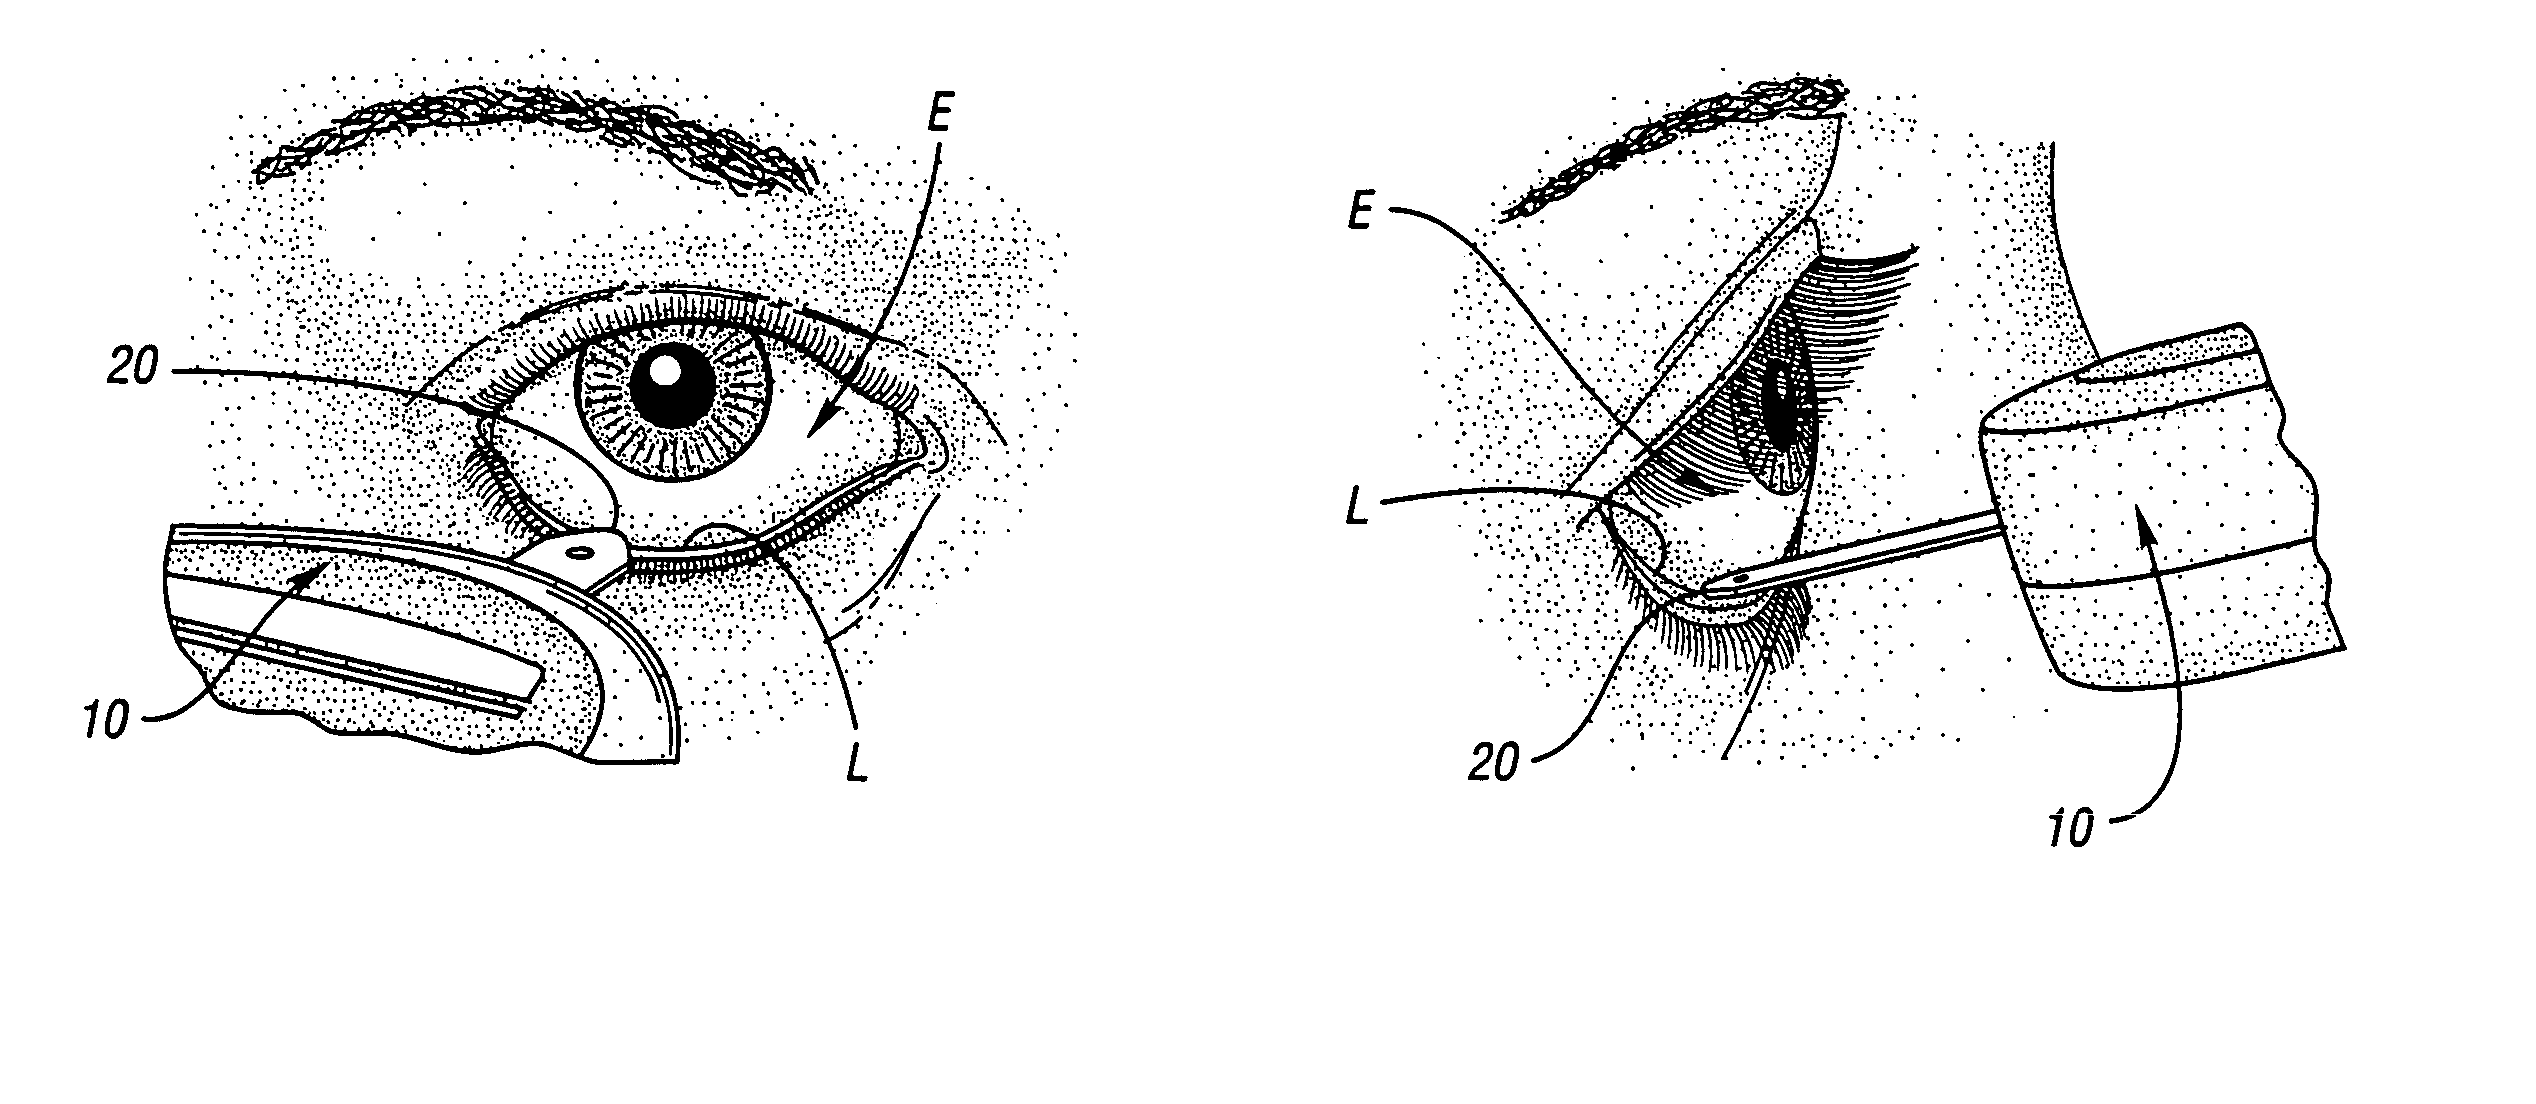 Method and apparatus for non-invasive monitoring of blood substances using self-sampled tears